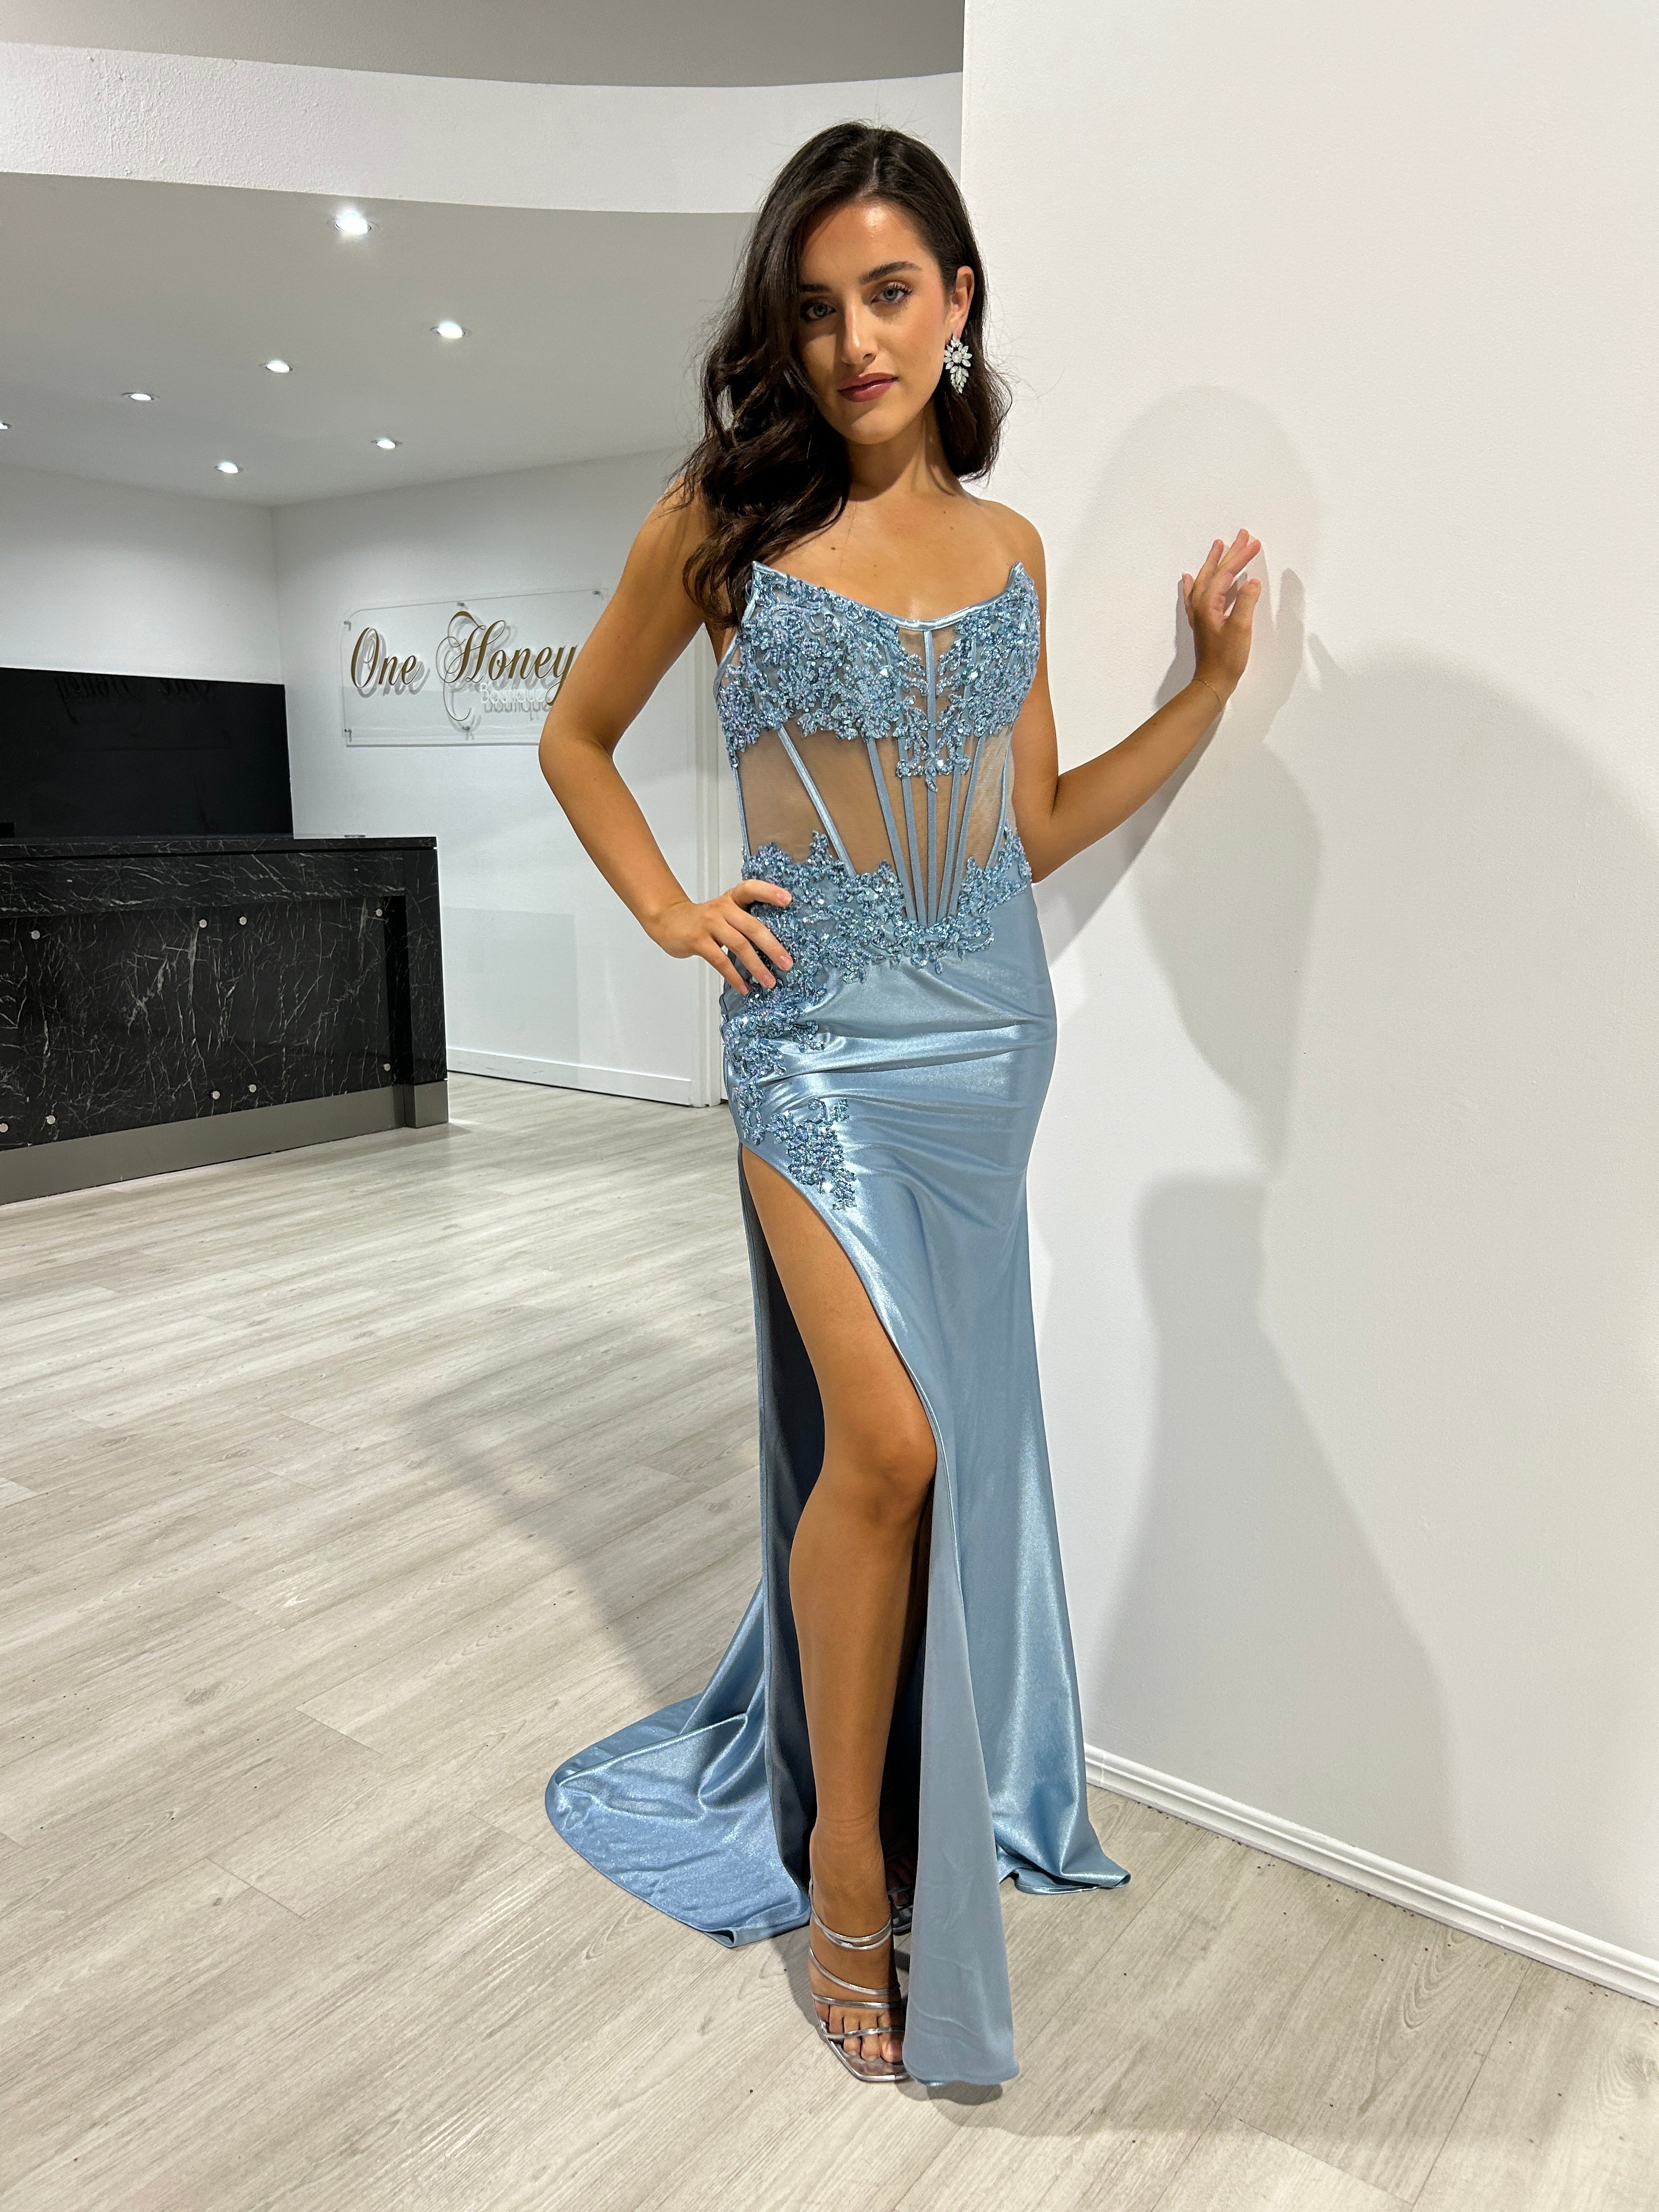 Honey Couture AZURA Dusty Blue Strapless Corset Silky Mermaid Formal Gown Dress